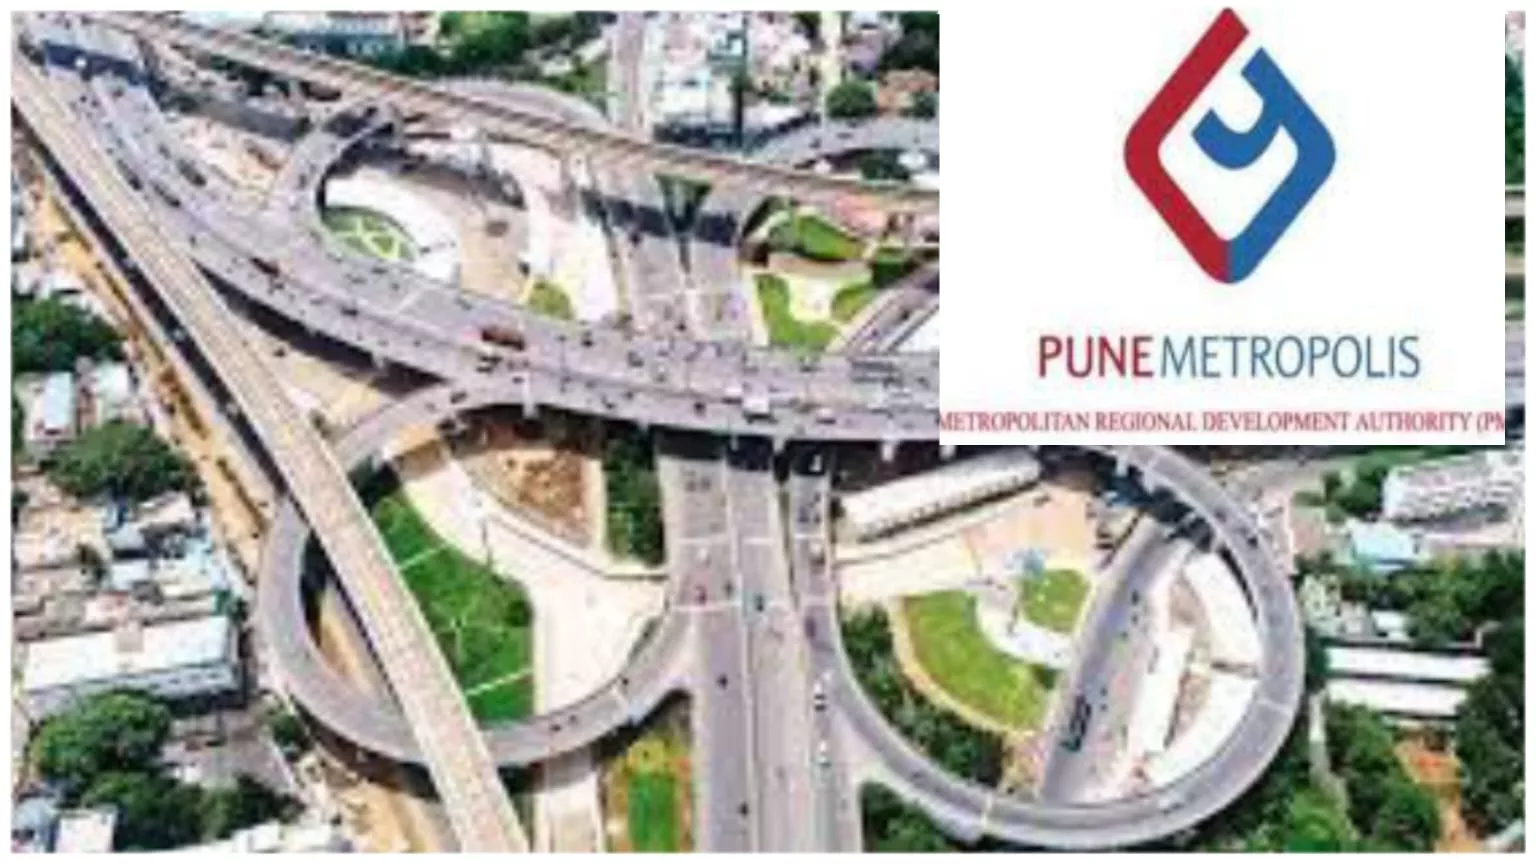 Pune: PMRDA to start work on the remaining 32 km of ring road from Chakan  to Nagar Road after this monsoon | Pune News, Times Now